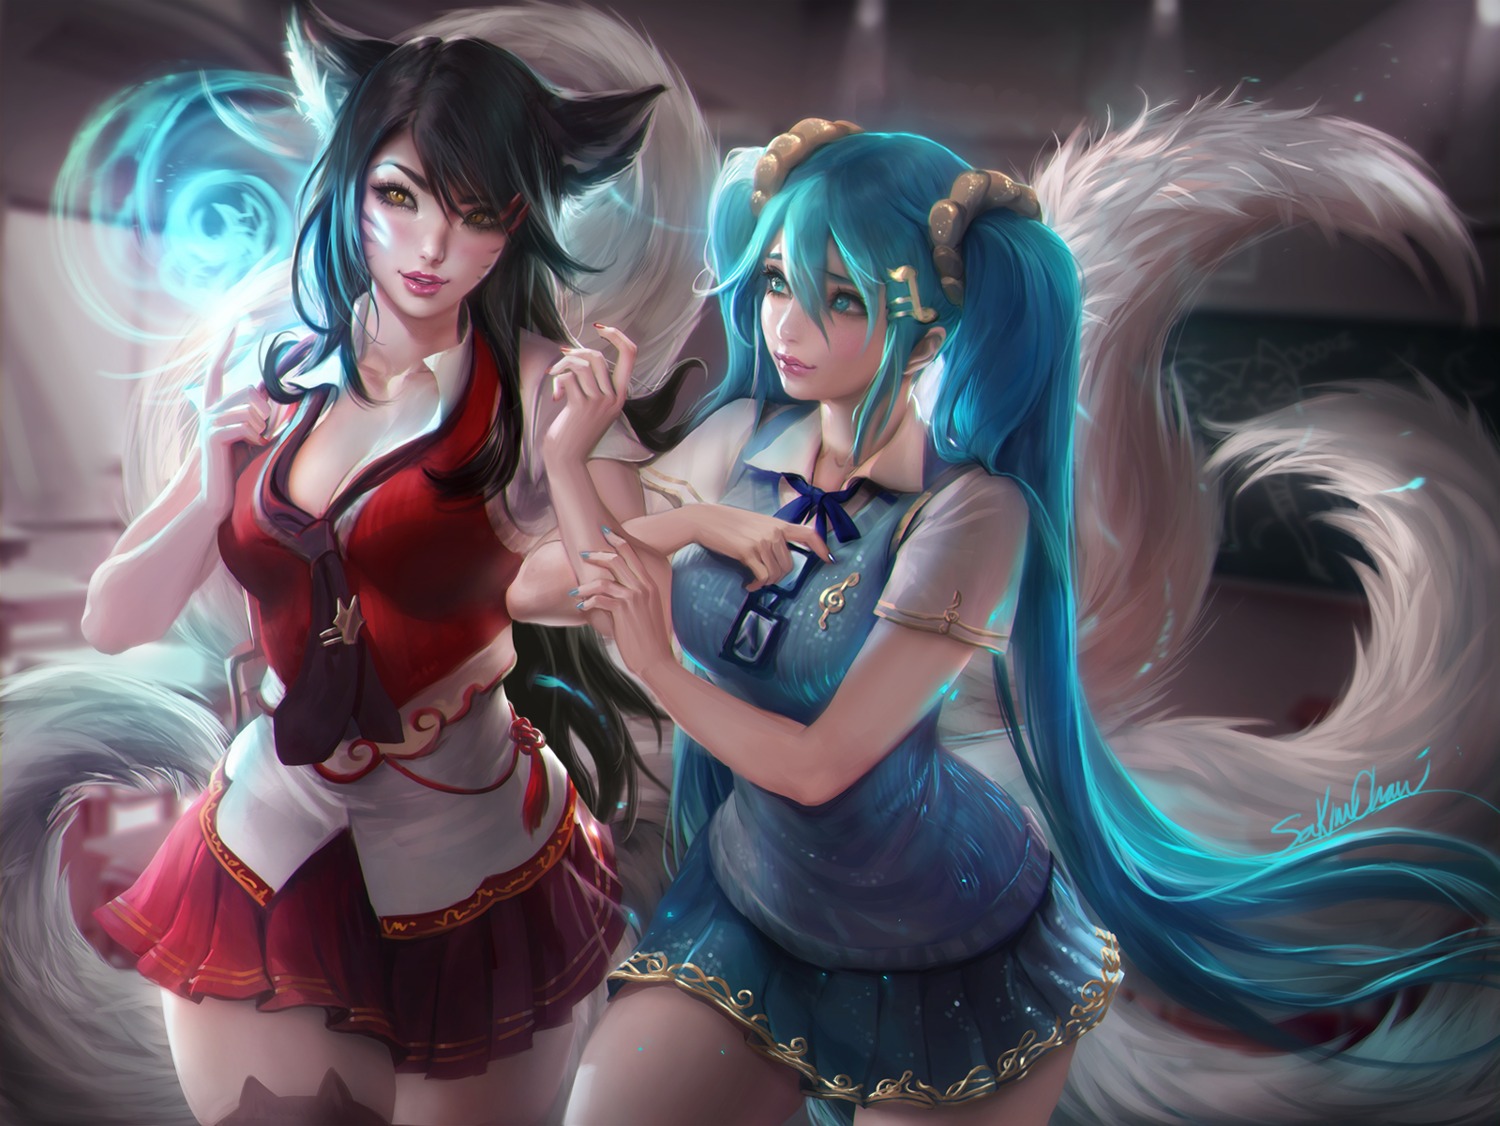 ahri animal_ears cleavage league_of_legends open_shirt sakimichan seifuku sona_buvelle tail thighhighs